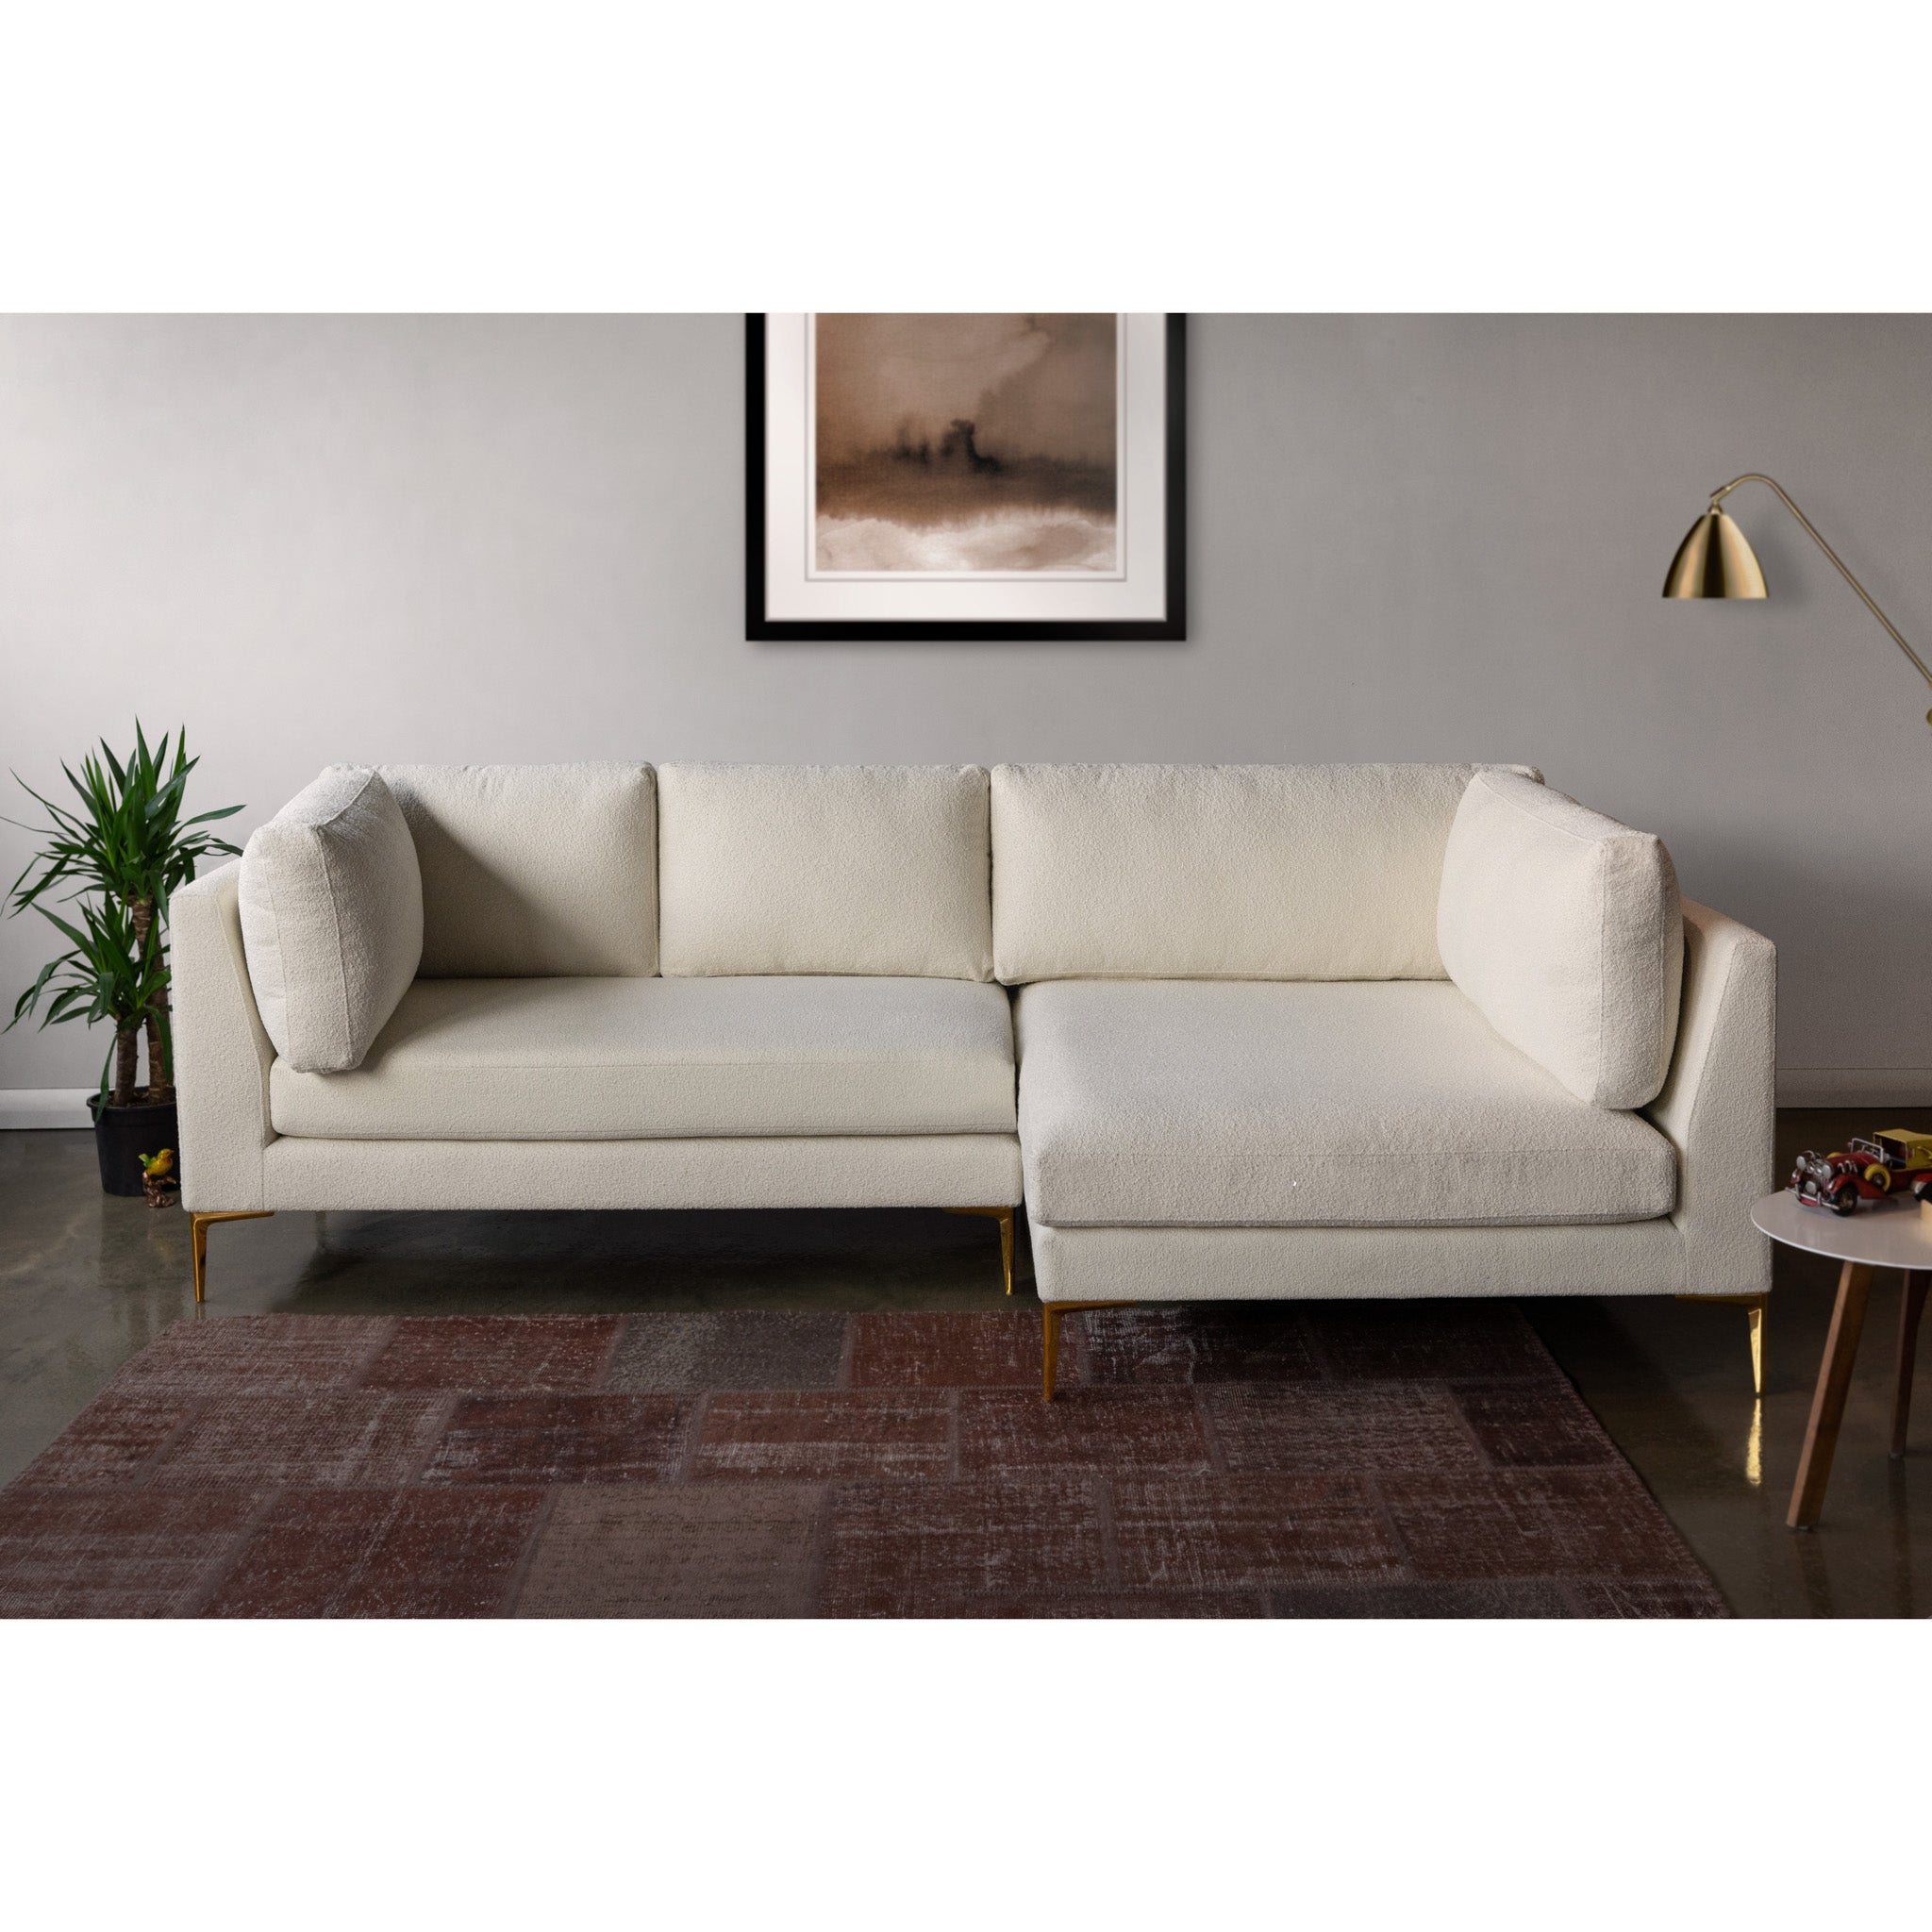 Chamberlain Right Facing Chaise Sectional Sofa (Beige Boucle)